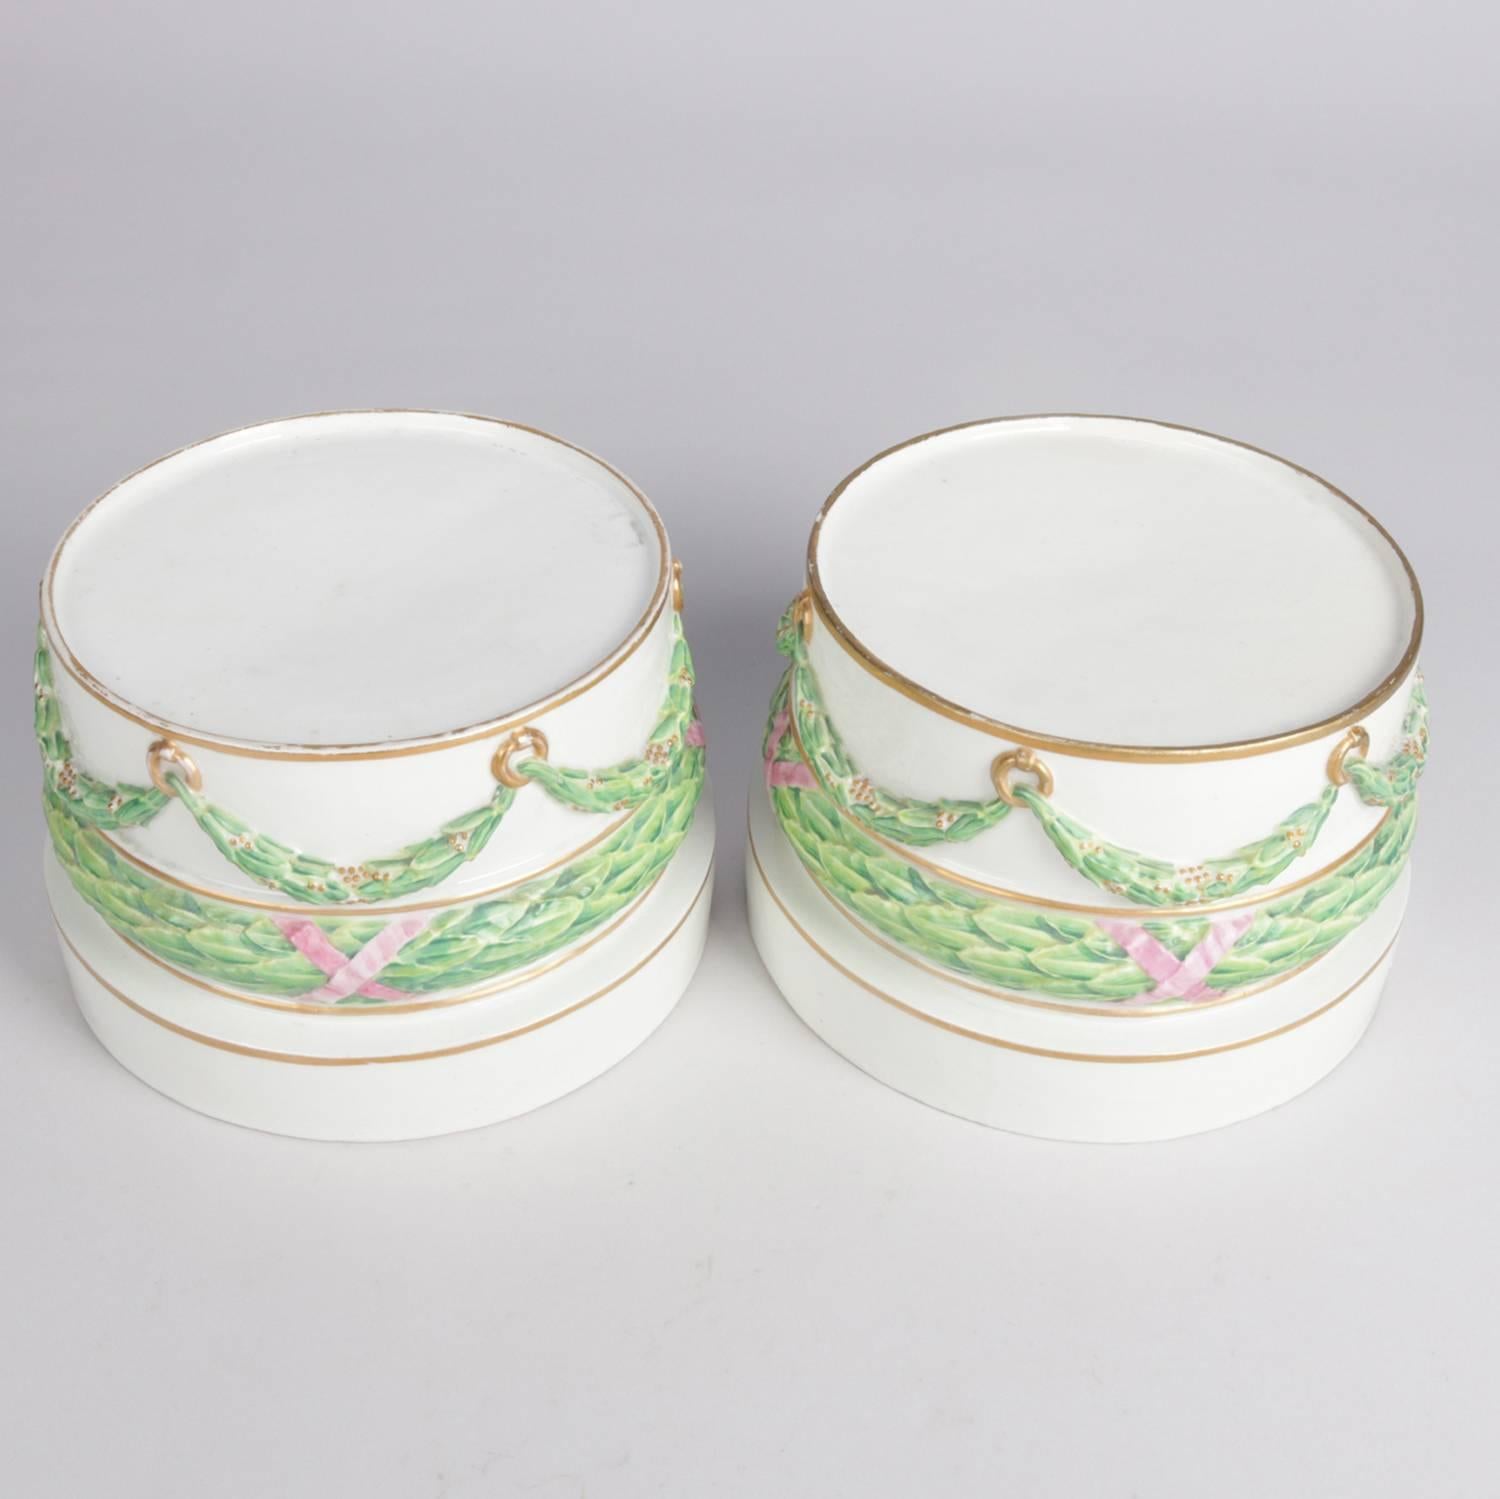 Pair of German porcelain round sculpture plinths/bases feature hand-painted and gilt draped garland decoration, en verso blue crossed sword mark and 